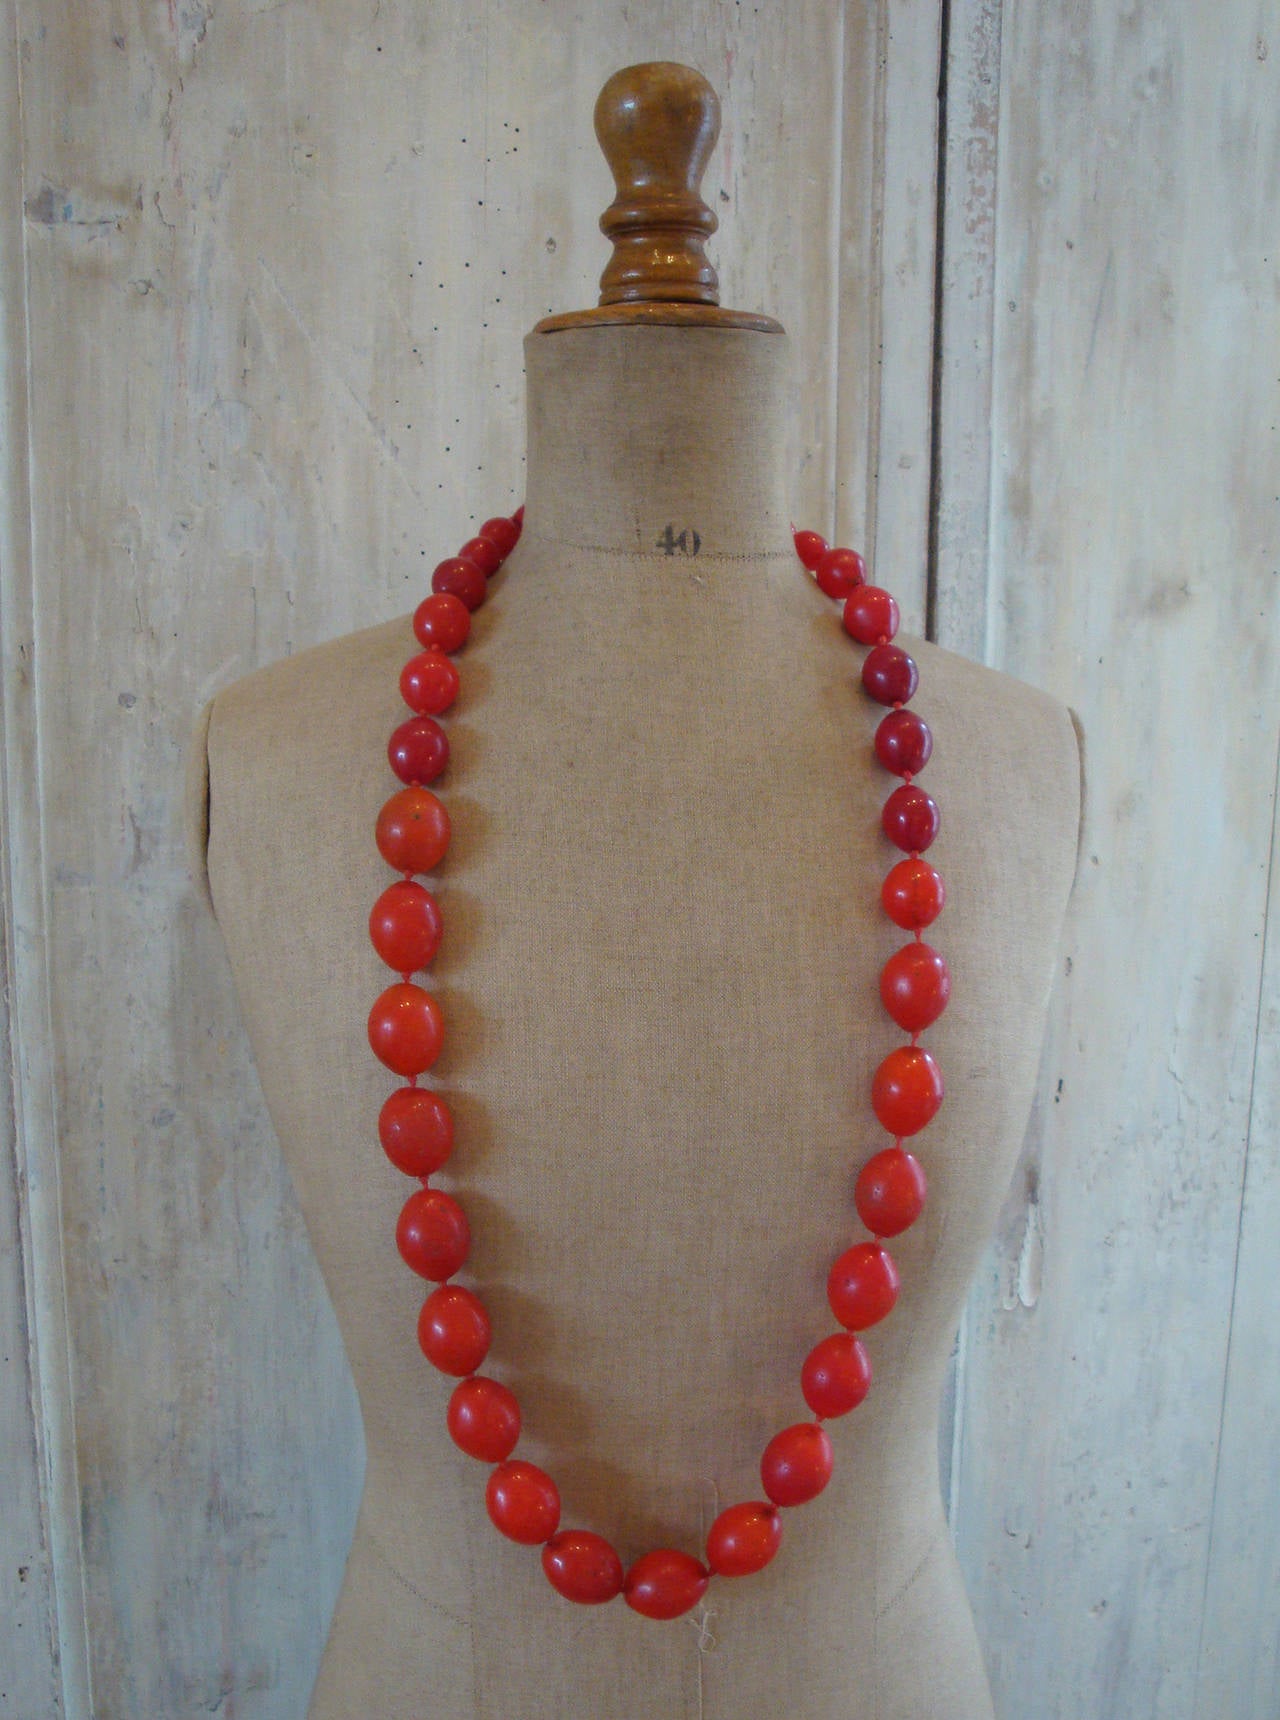 19th century red glass beads, knotted necklace from East Africa.